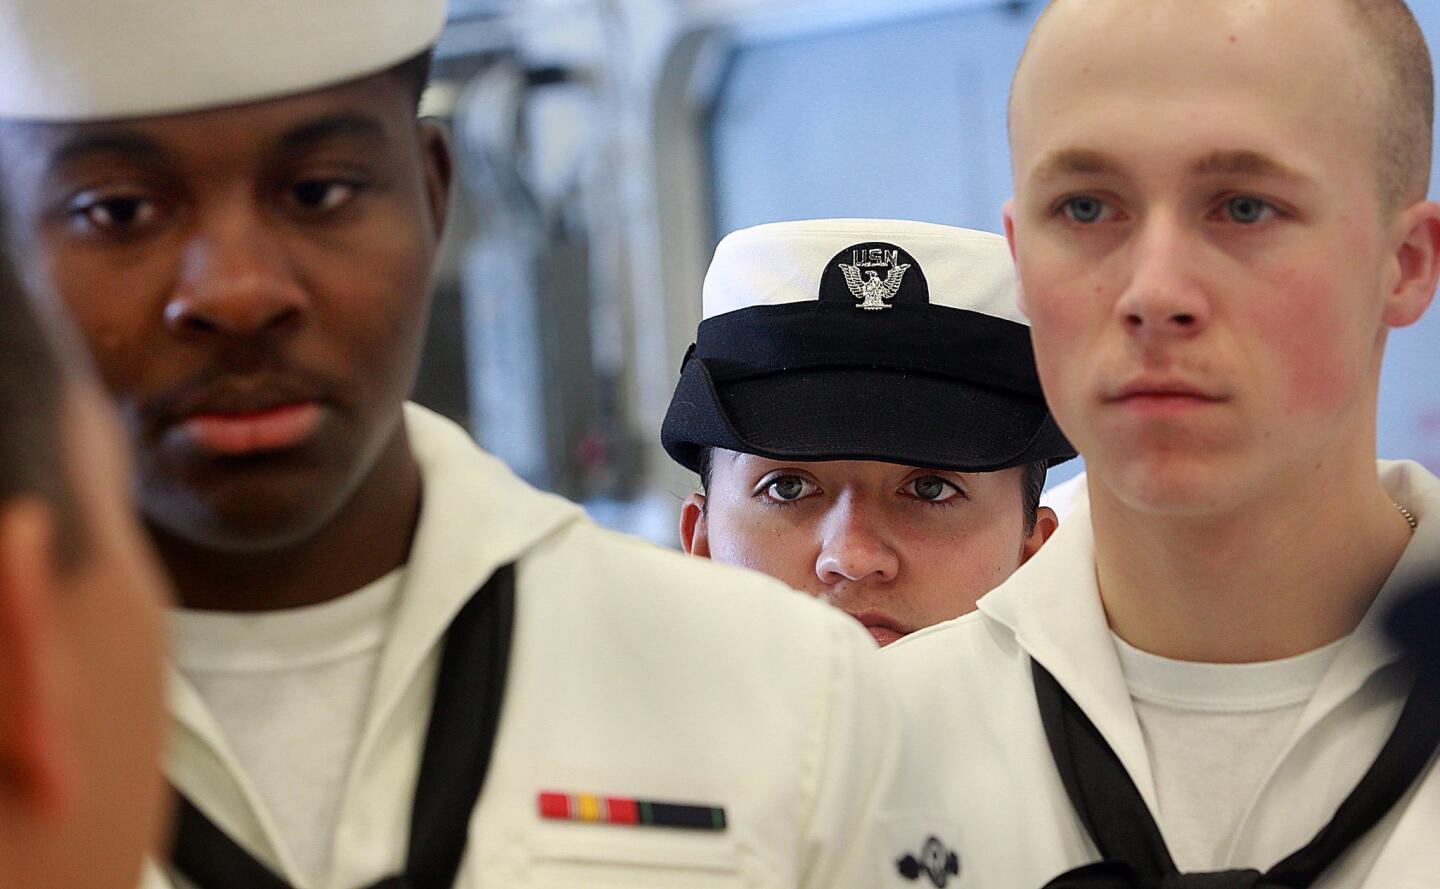 Airman Amanda Garcia, center, looks over the shoulders of fellow airmen Deldrick Lee and Jeff Heatley, while listening to their chief, aboard the USS America.